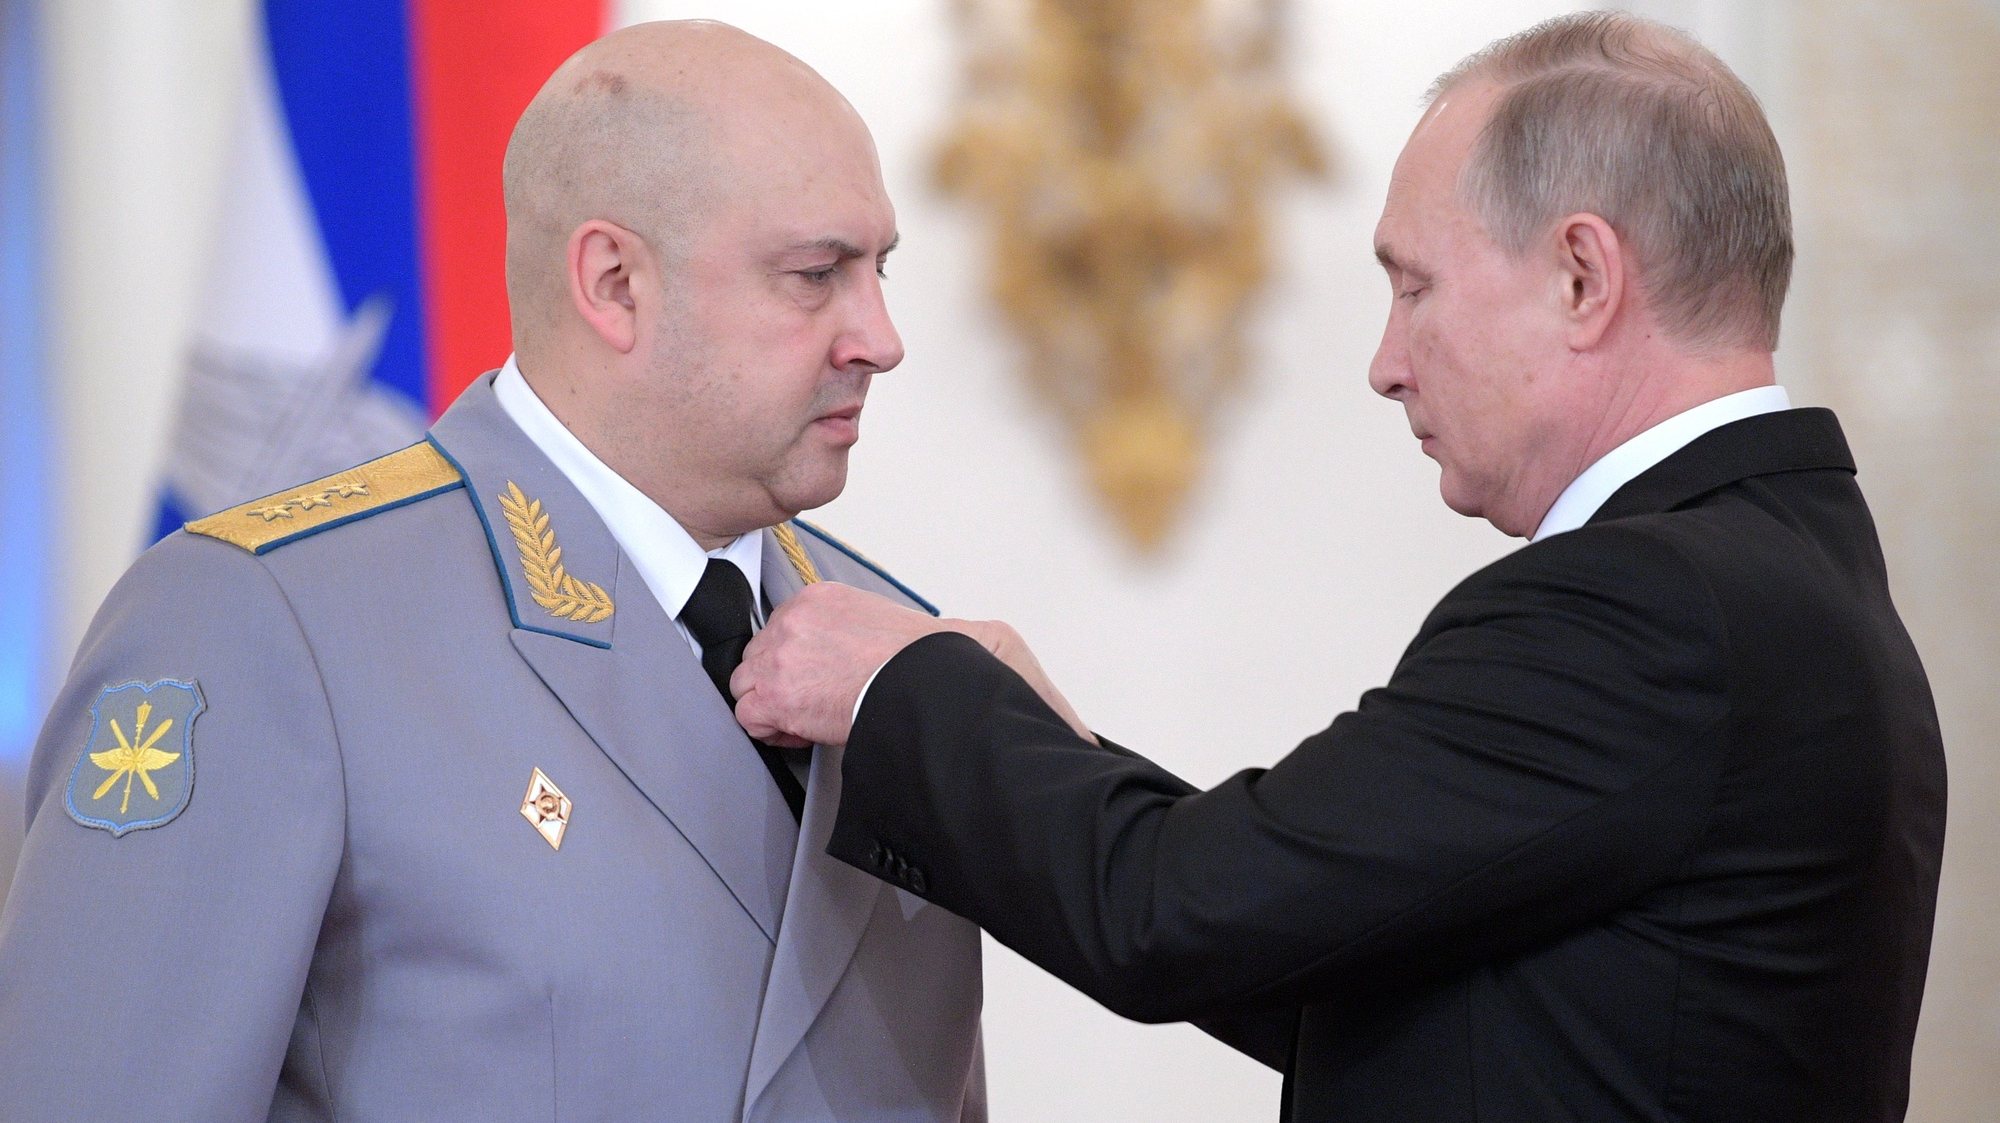 epa06407769 Russian President Vladimir Putin (R) decorates Commander of the Russian troops in Syria Colonel General Sergei Surovikin (L) during a ceremony to present state awards to Russian military servicemen who fought in Syria, at the Kremlin in Moscow, Russia, 28 December 2017. Over 600 servicemen attended the ceremony.  EPA/ALEXEI DRUZHININ / SPUTNIK / KREMLIN / POOL MANDATORY CREDIT